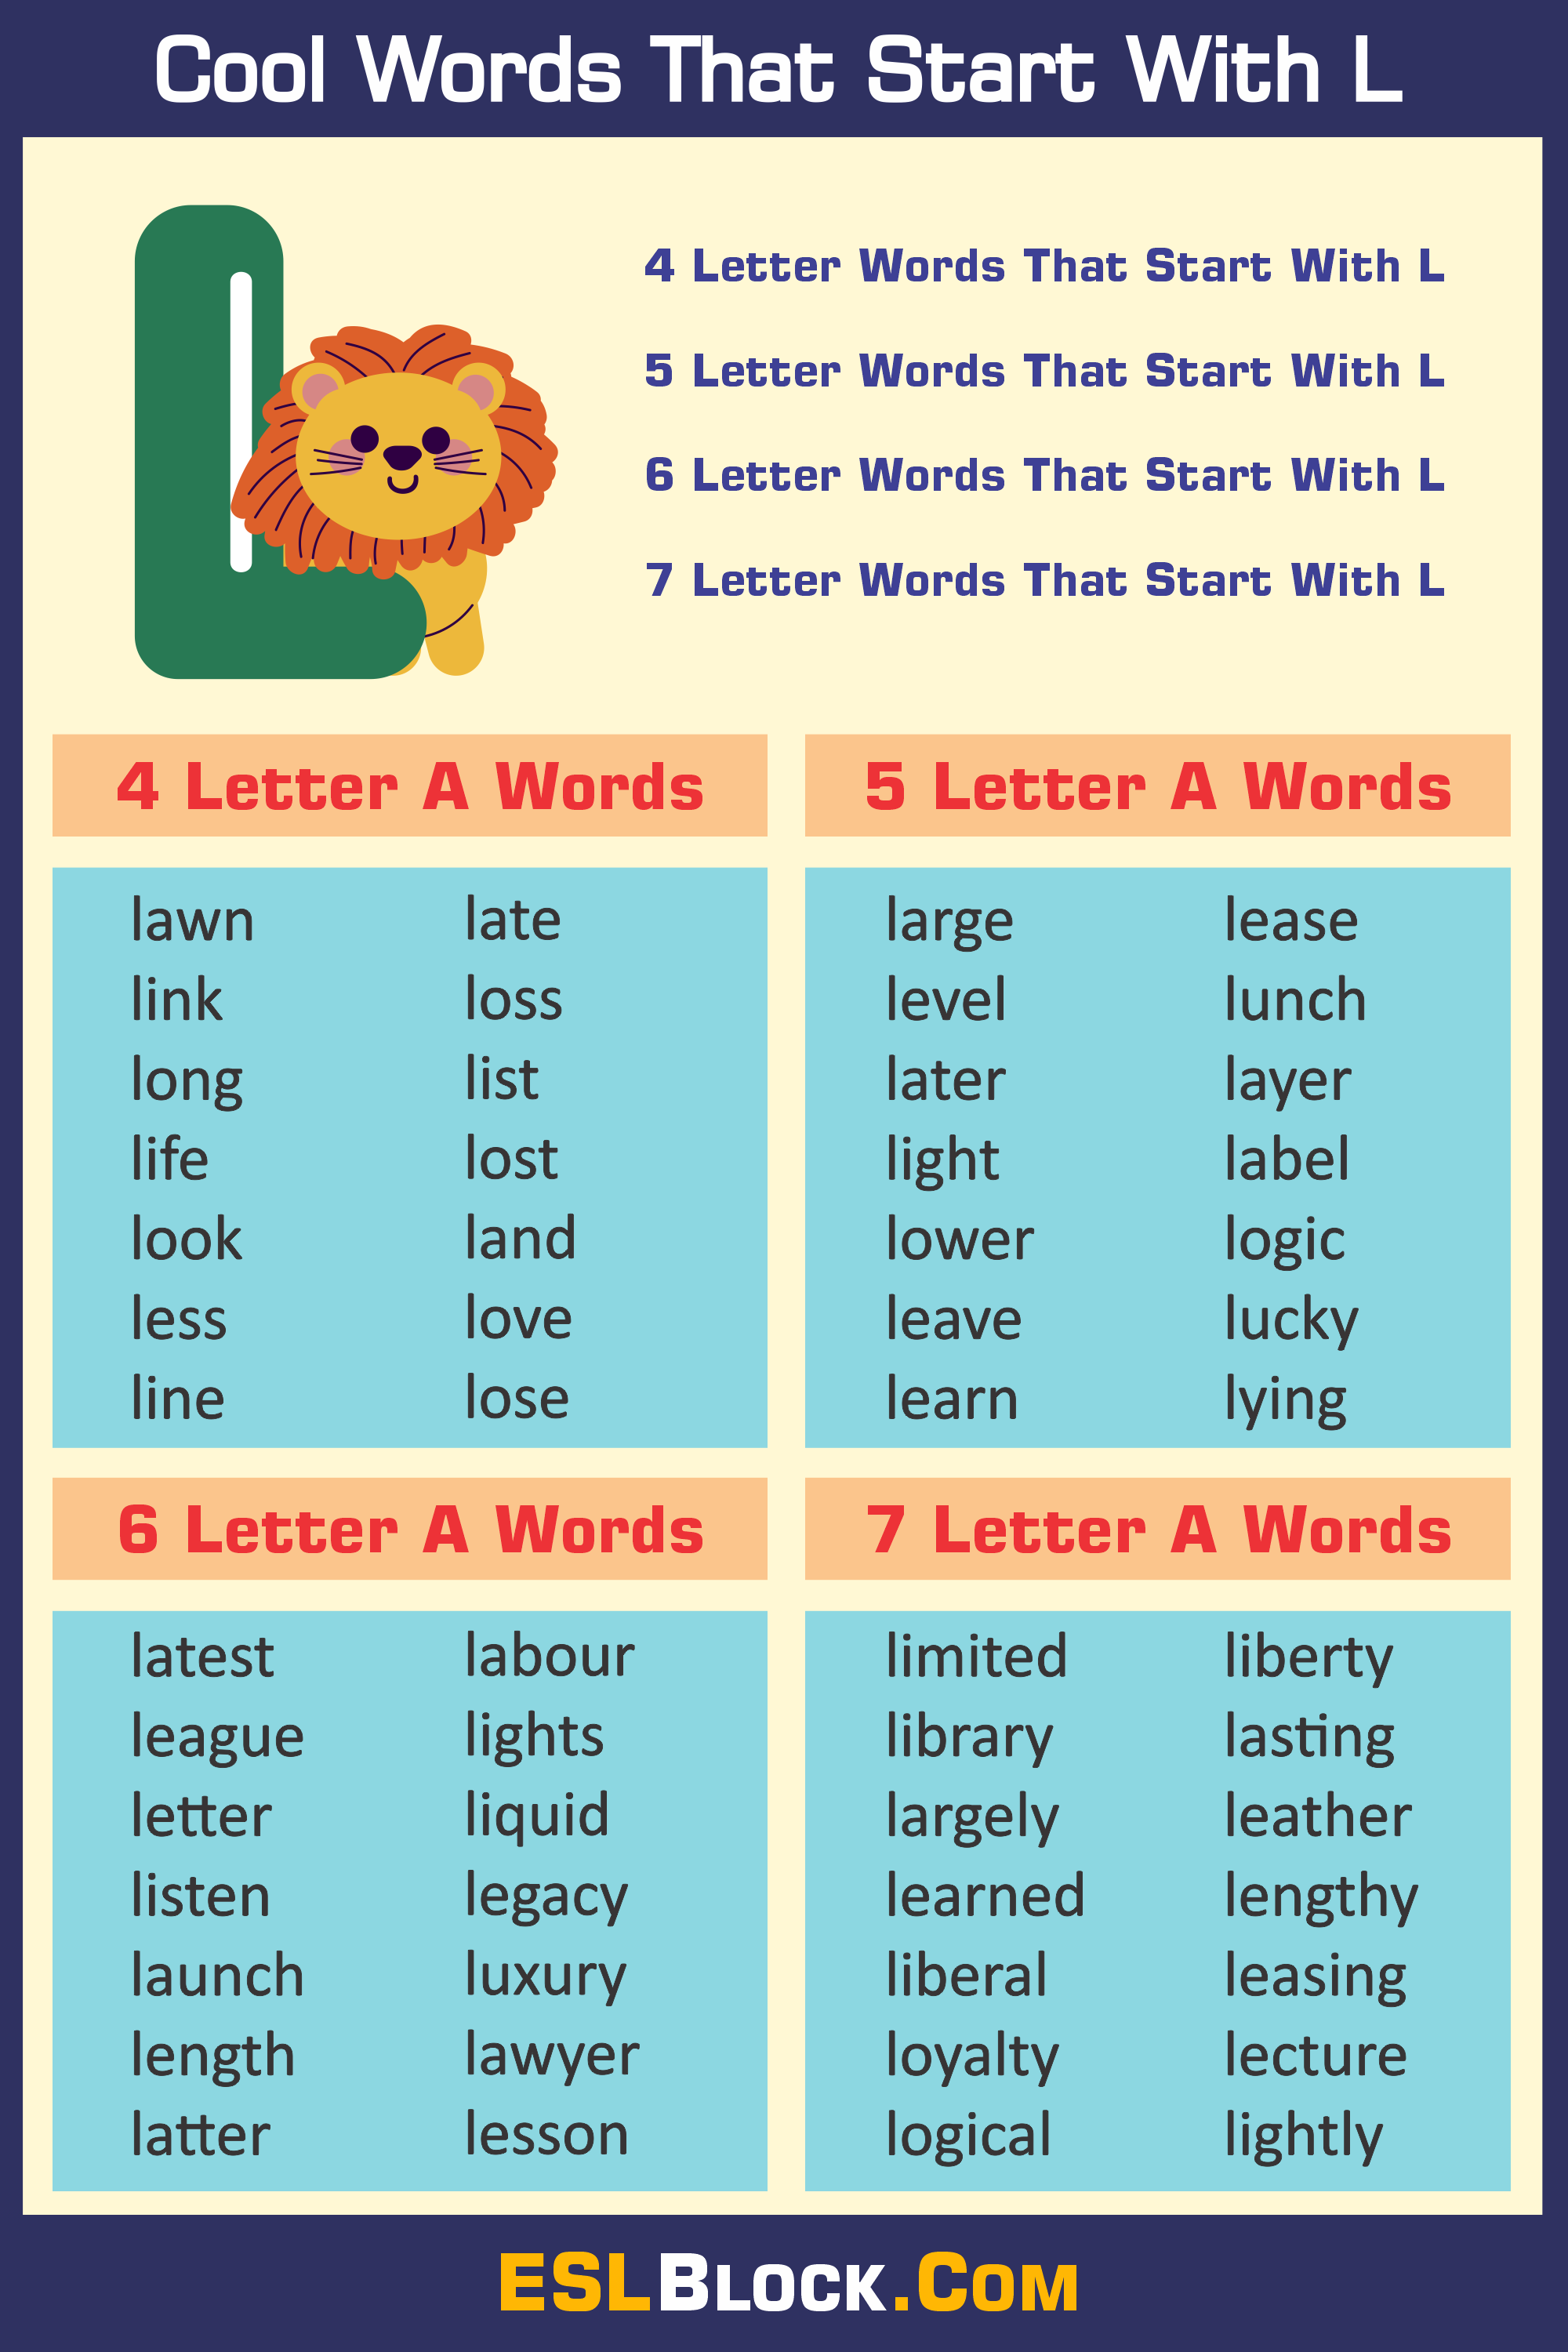 4 Letter Words, 4 Letter Words That Start With L, 5 Letter Words, 5 Letter Words That Start With L, 6 Letter Words, 6 Letter Words That Start With L, 7 Letter Words, 7 Letter Words That Start With L, Awesome Cool Words, Christmas Words That Start With L, Cool Words, Describing Words That Start With L, Descriptive Words That Start With L, English Words, Five Letter Words Starting with L, Good Words That Start With L, L Words, Nice Words That Start With L, Positive Words That Start With L, Unique Words, Word Dictionary, Words That Start With L, Words That Start With L to Describe Someone